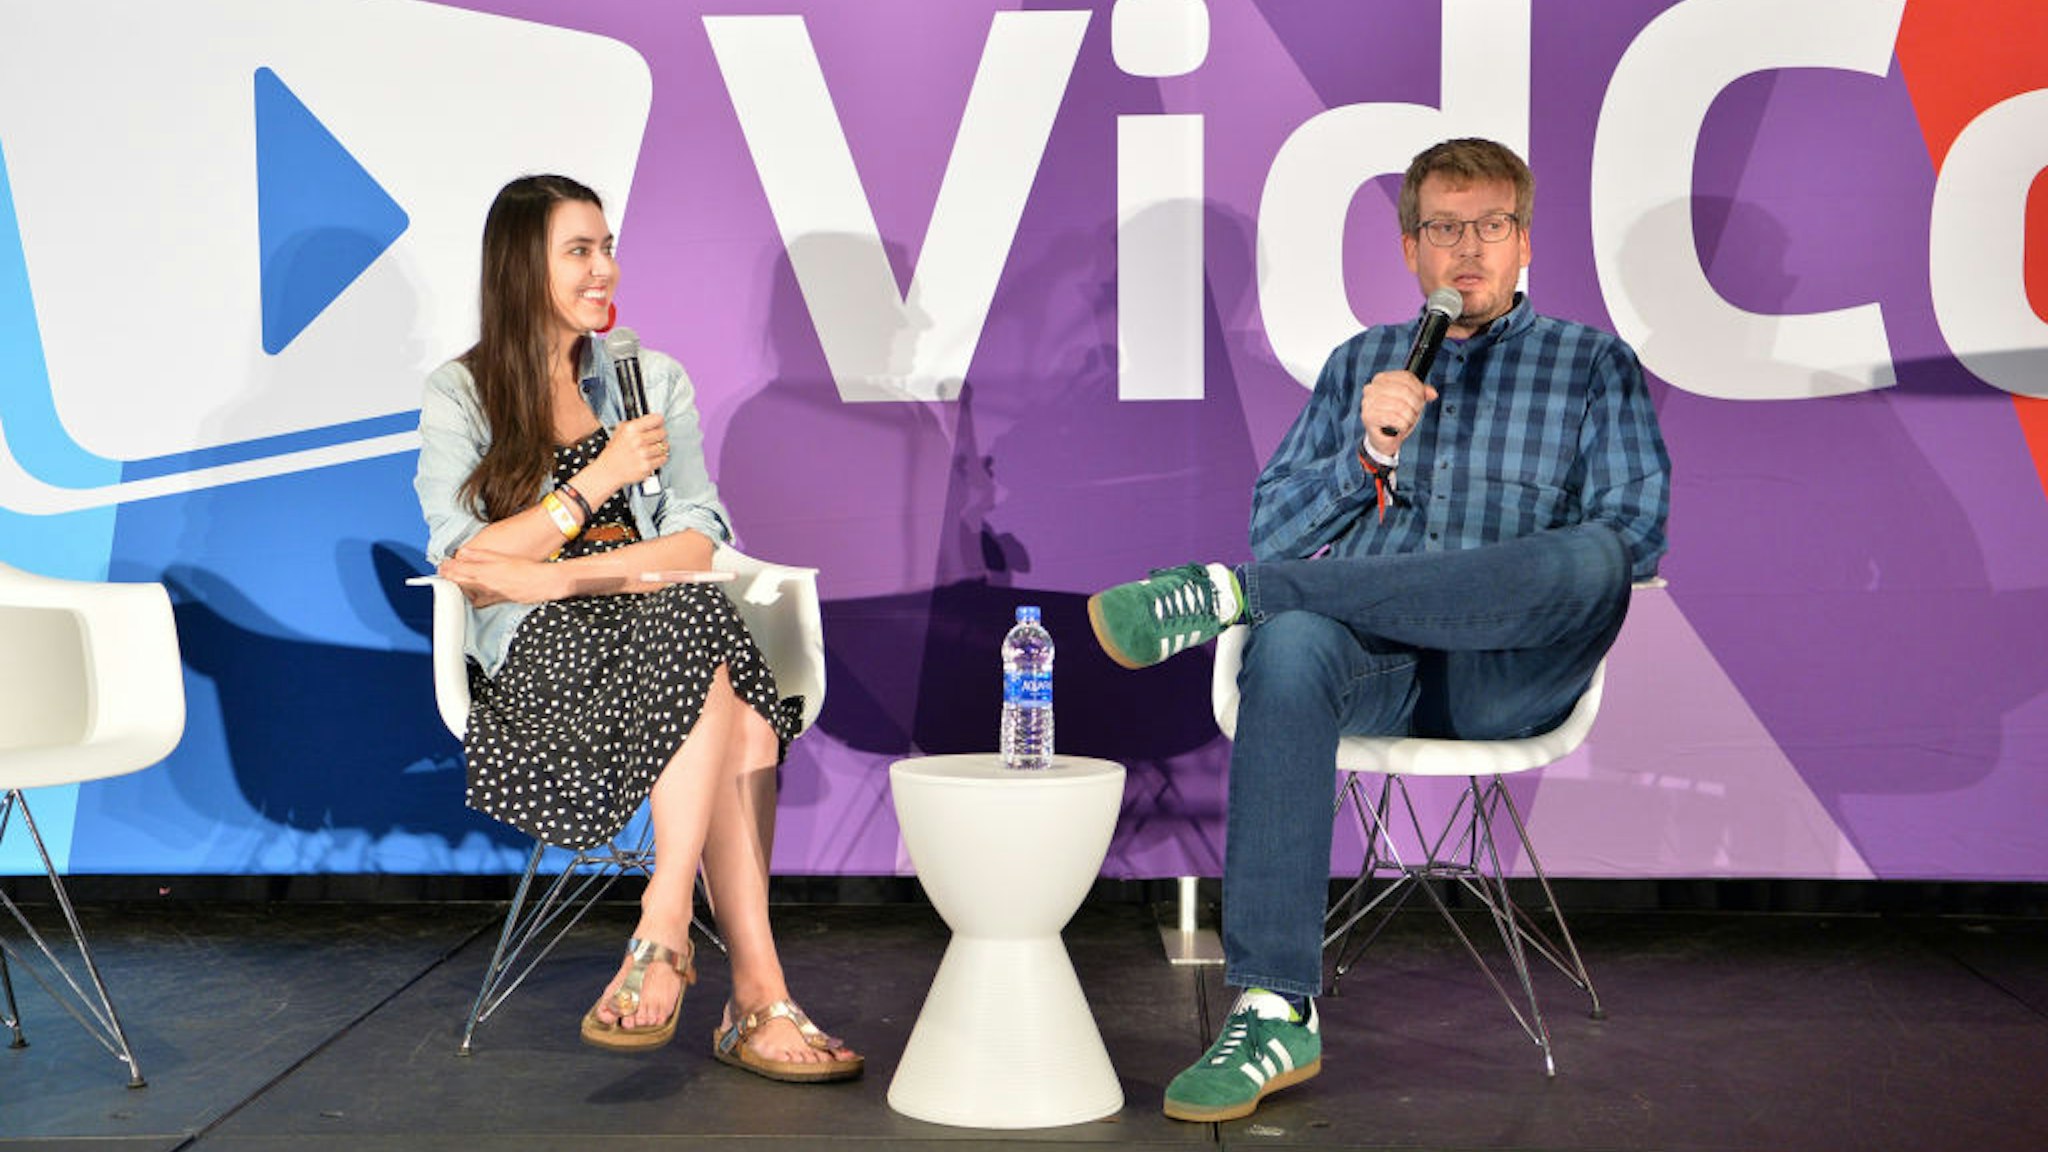 Taylor Lorenz and John Green attend VidCon 2019 at Anaheim Convention Center on July 13, 2019 in Anaheim, California.